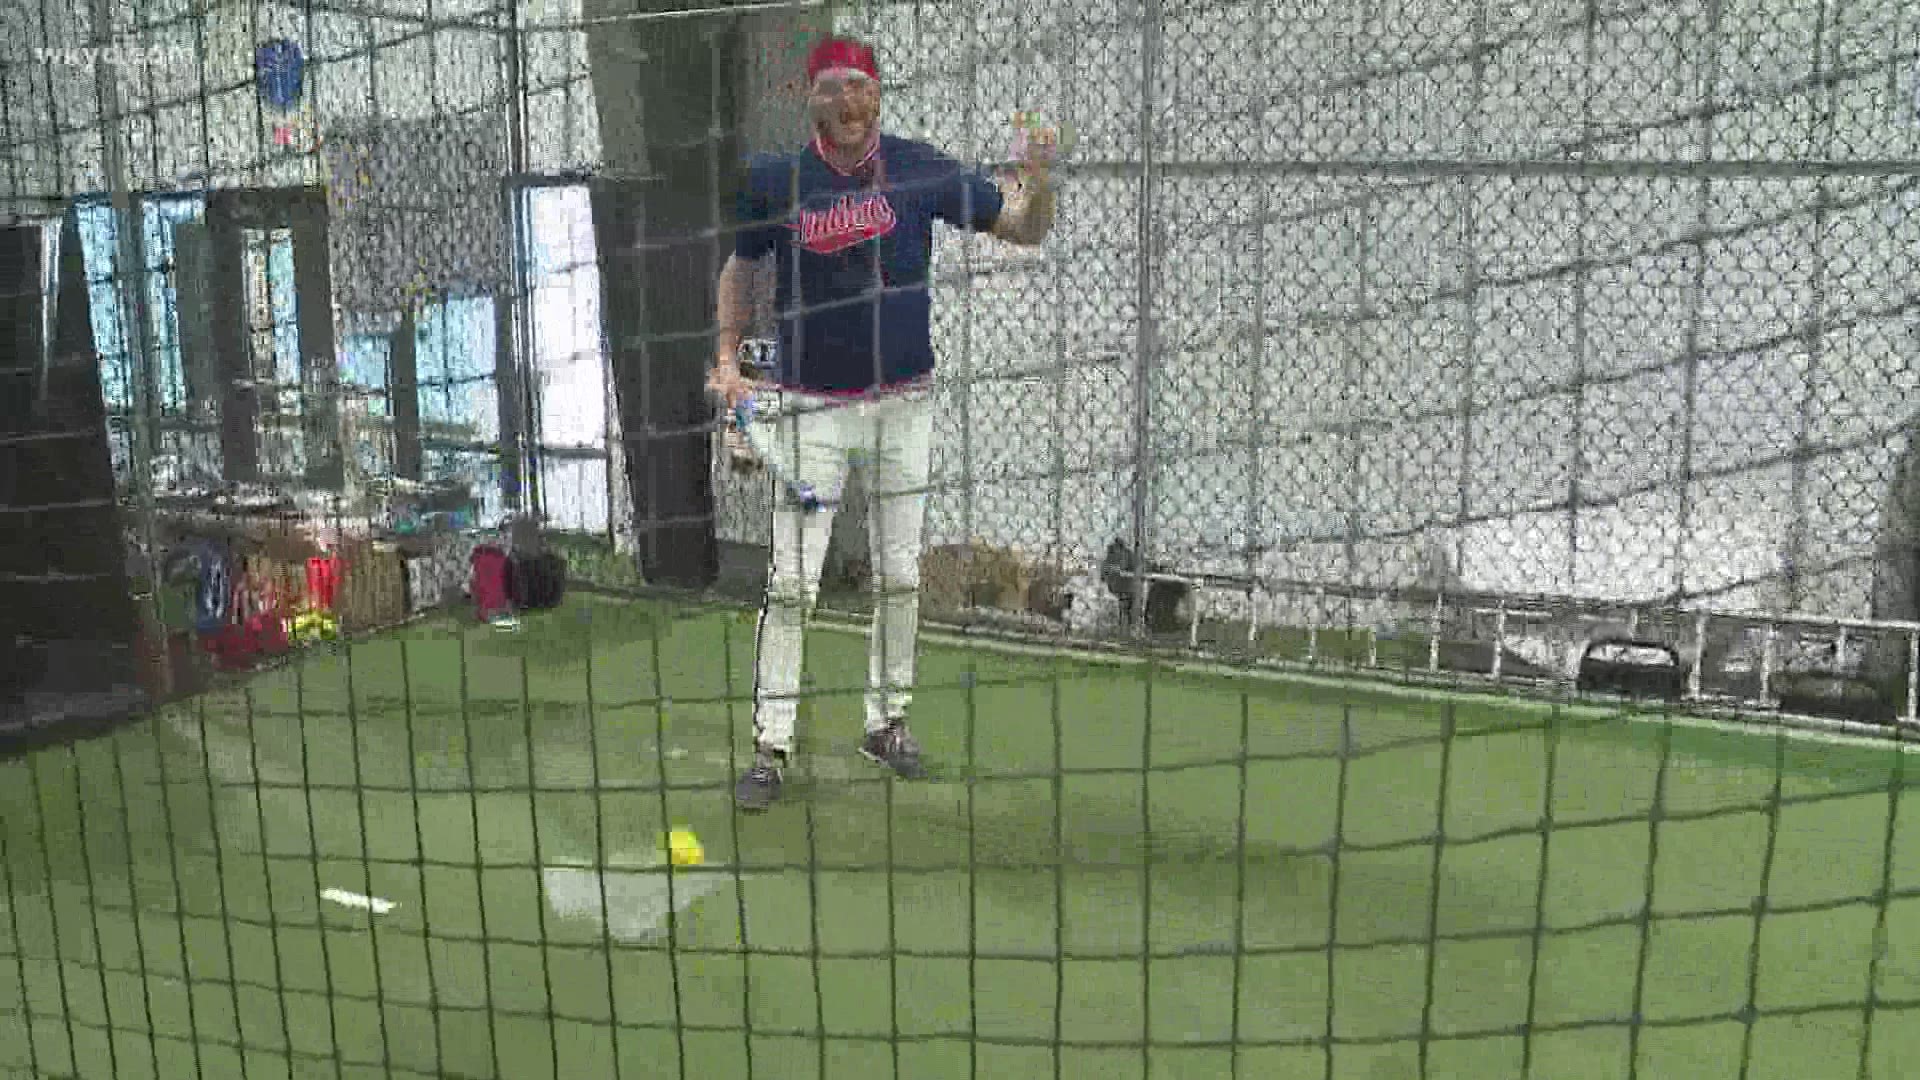 We're all hoping for the return of baseball. But in the meantime, we've got Mike Polk  Jr. at the batting cages.